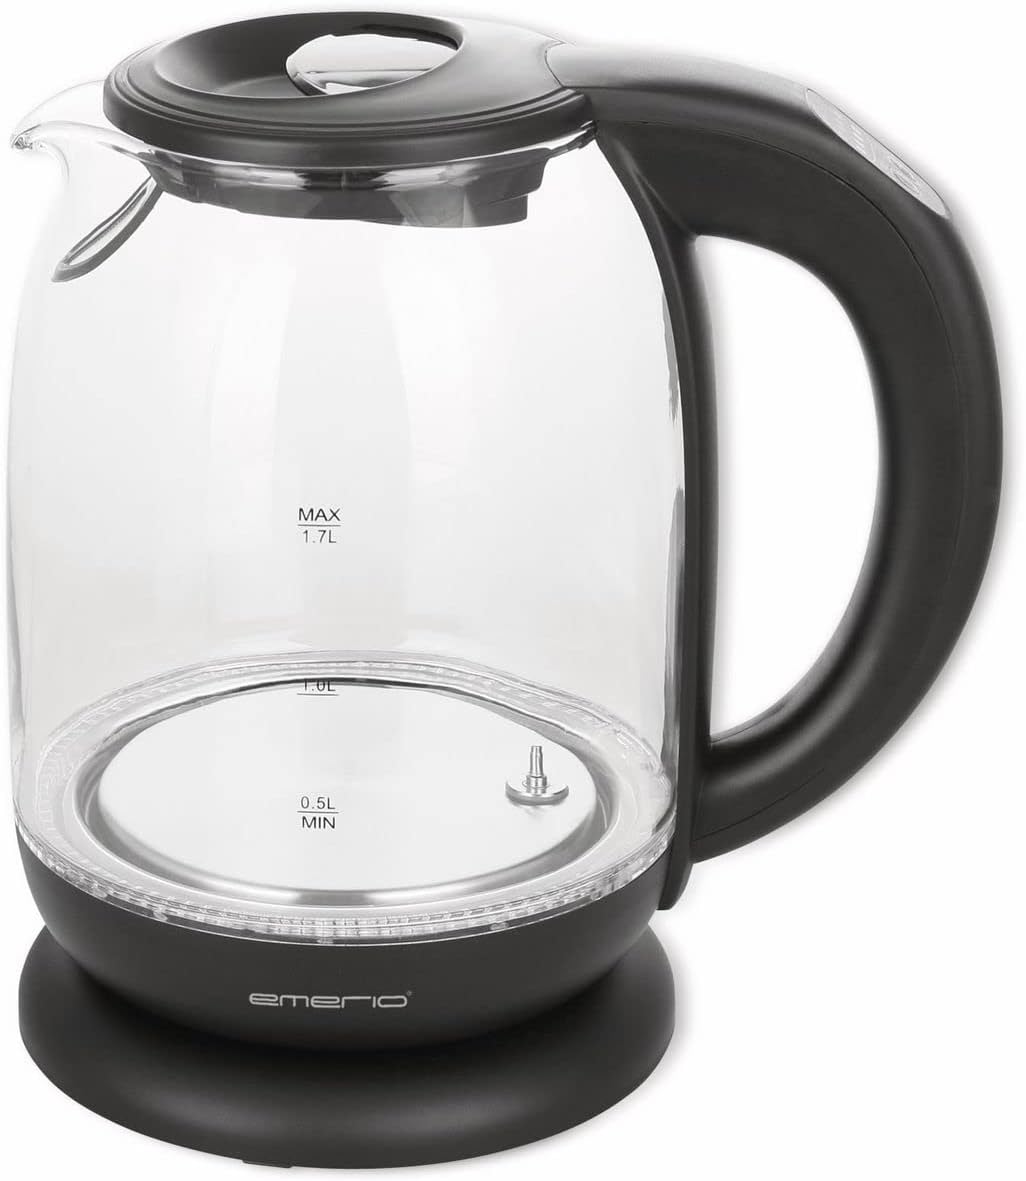 Emerio WK-119255 Kettle, Stainless Steel, 1.7 Litres, Glass